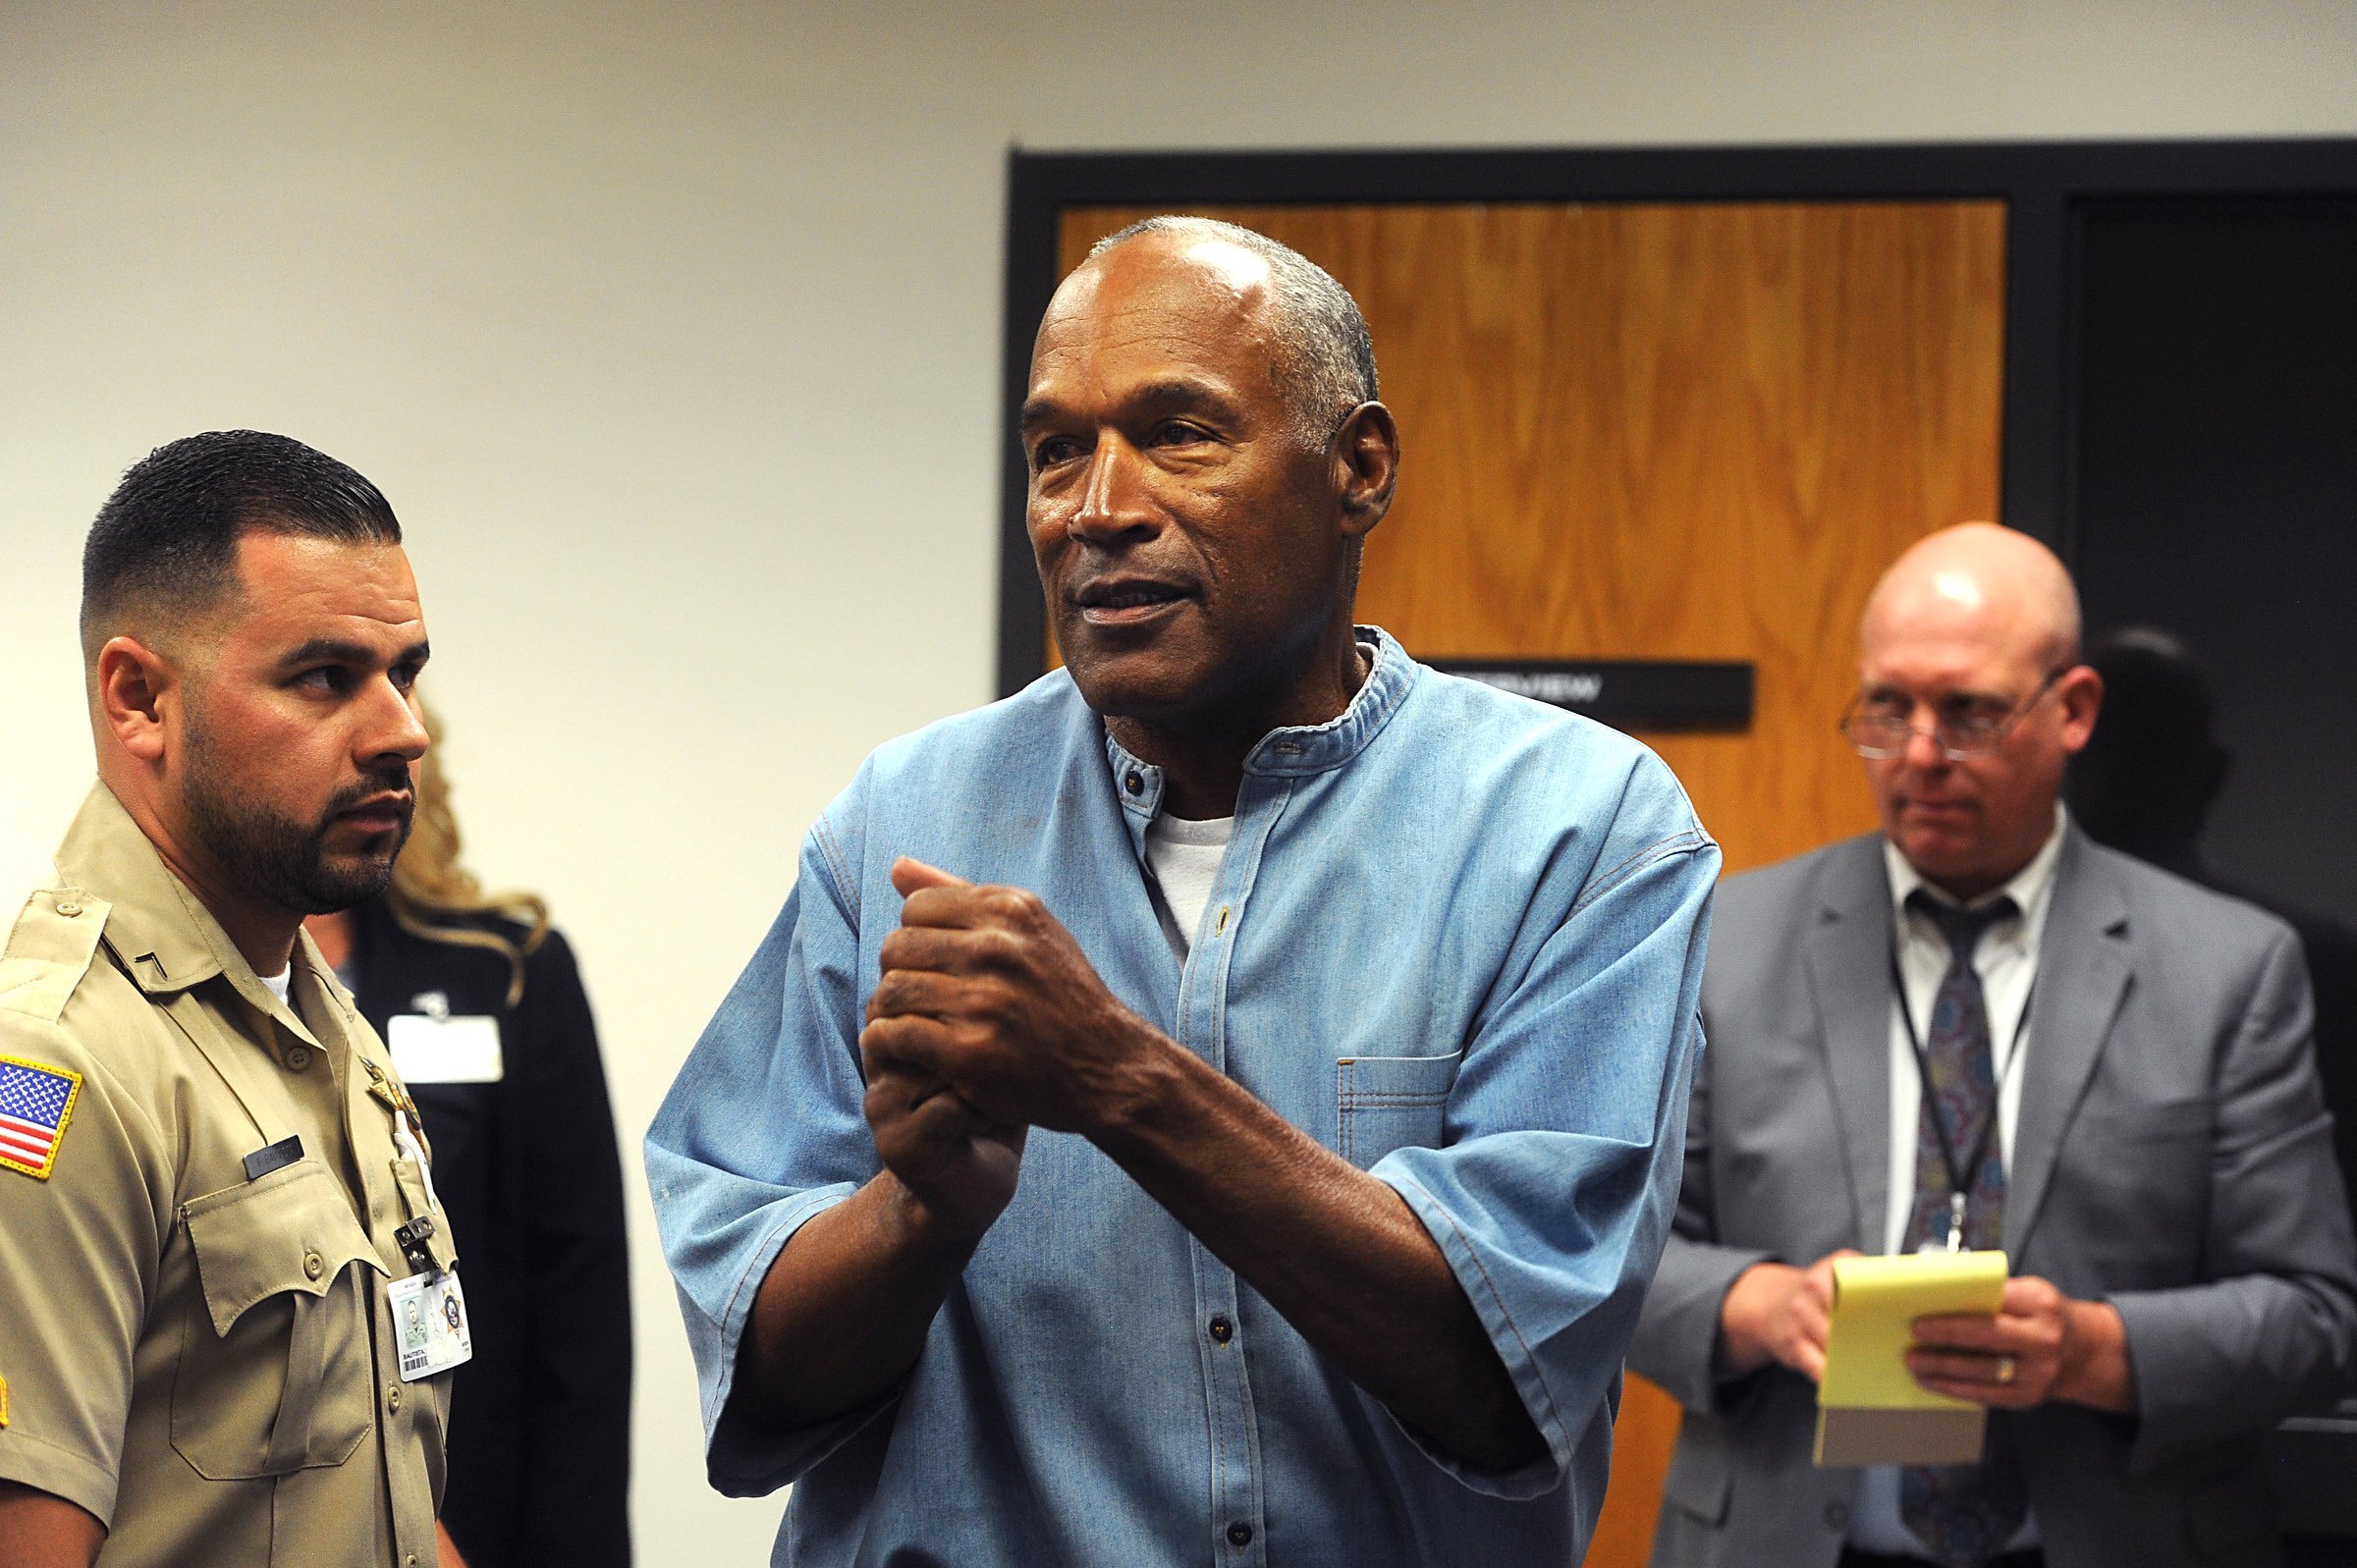 OJ Simpson during a hearing granting his parole in July 2017. | Photo: Getty Images